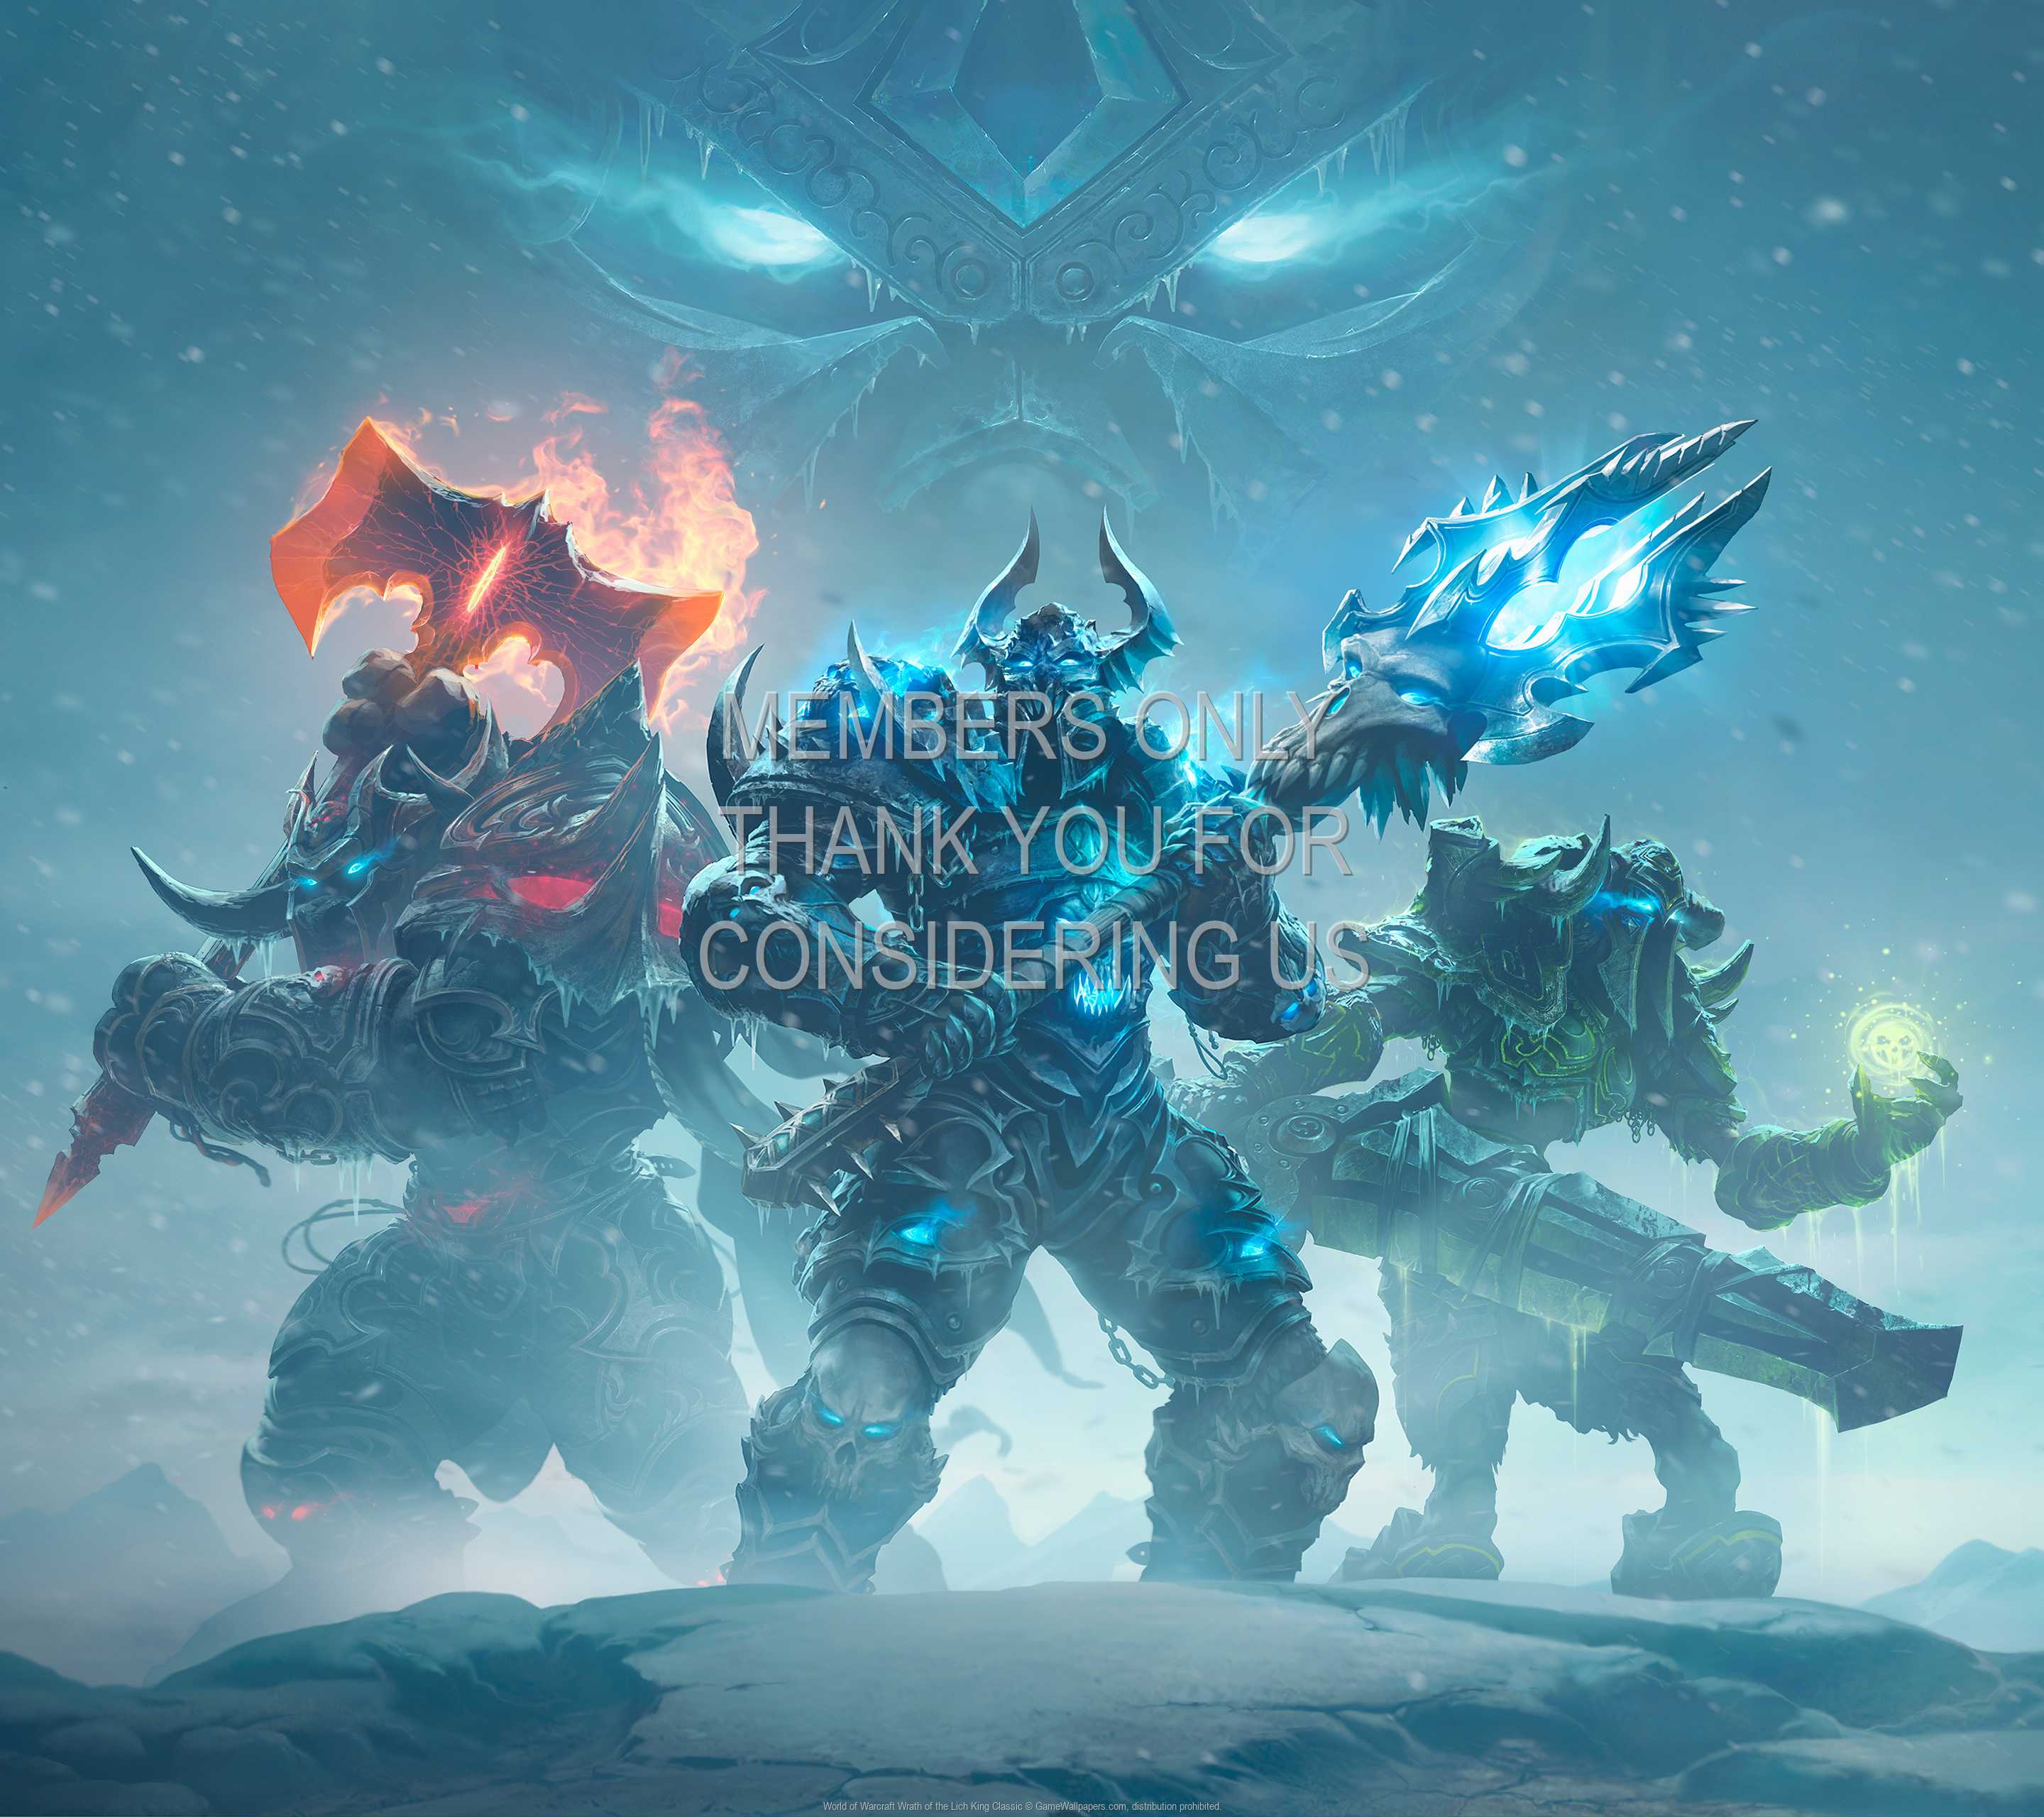 World of Warcraft: Wrath of the Lich King Classic 1440p Horizontal Mobiele achtergrond 03